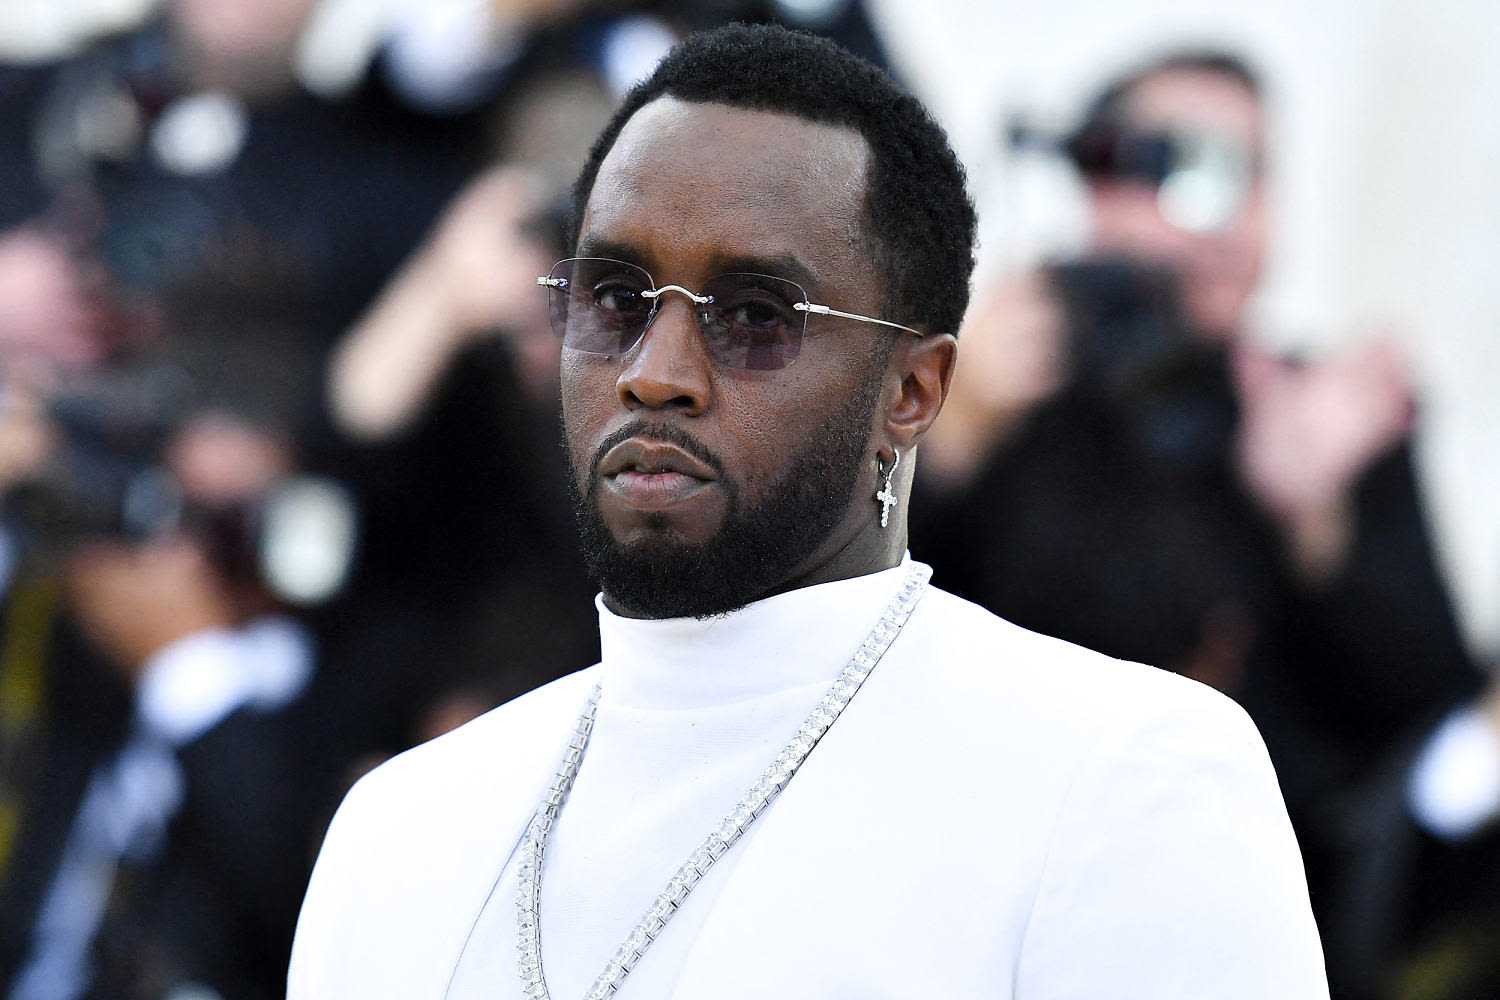 Sean Combs sells stake in Revolt, media company he founded